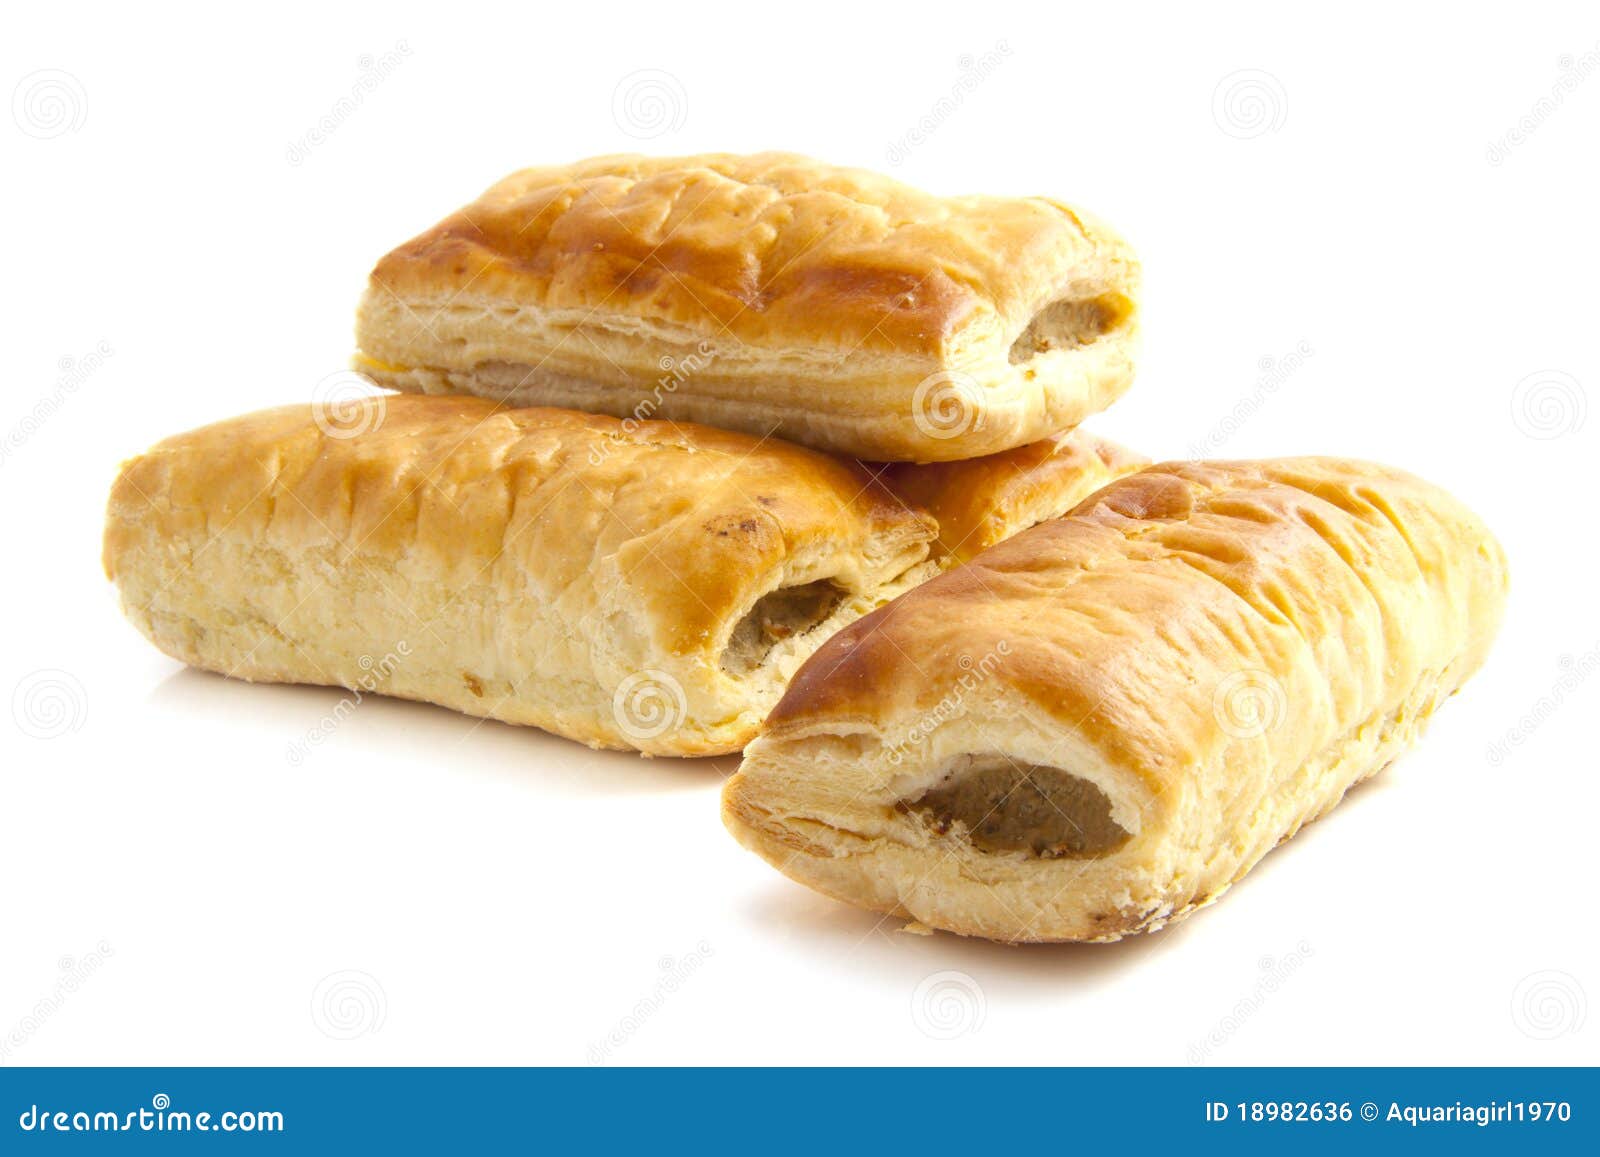 Sausage rolls stock photo. Image of finger, pastry, snack - 18982636